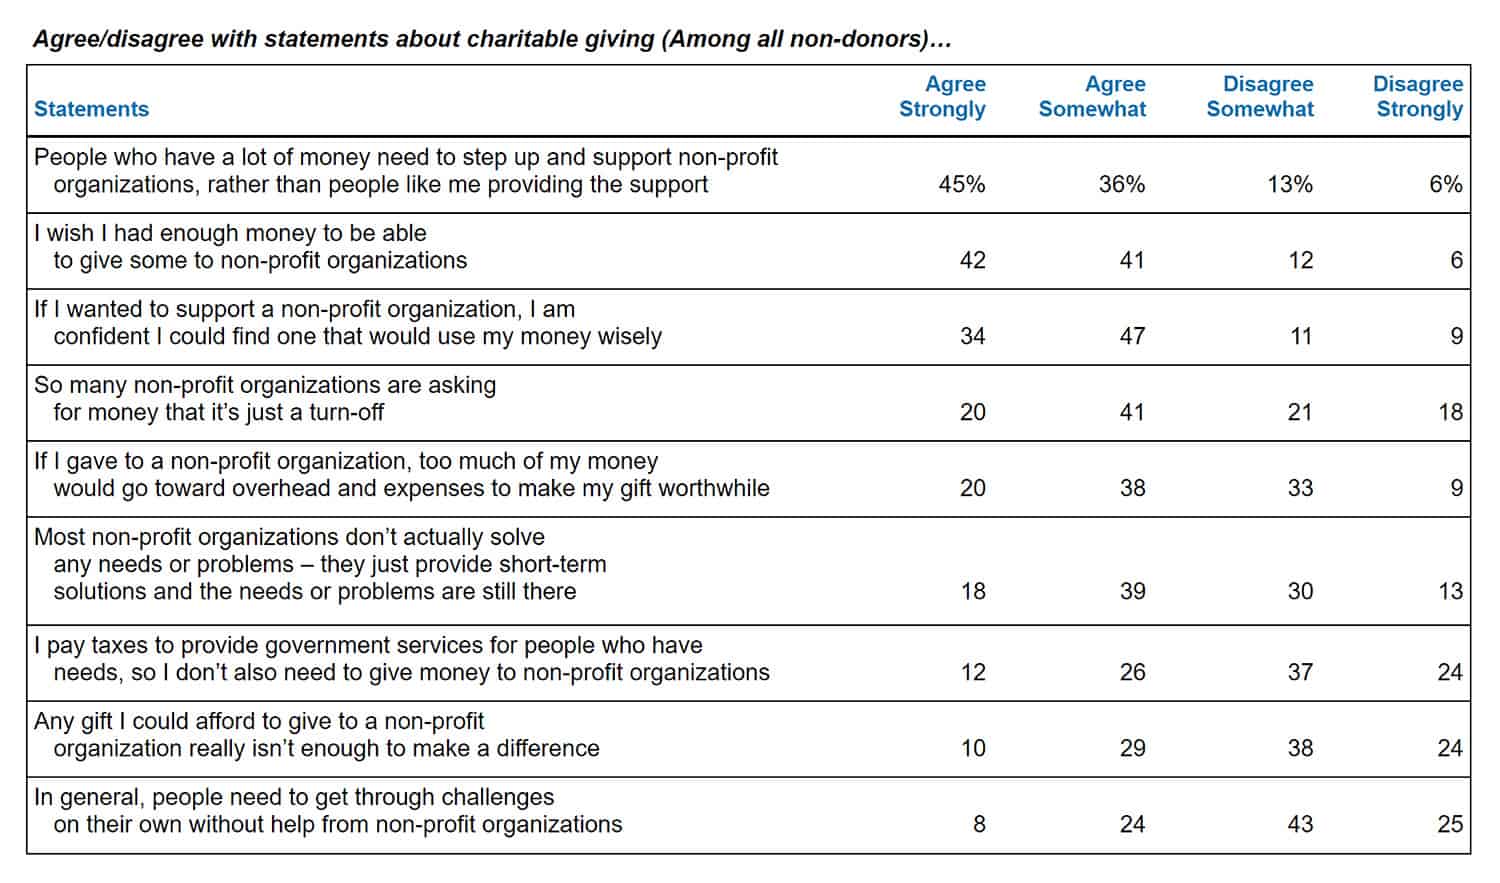 What do non-donors think about non-profit organizations and the act of giving?